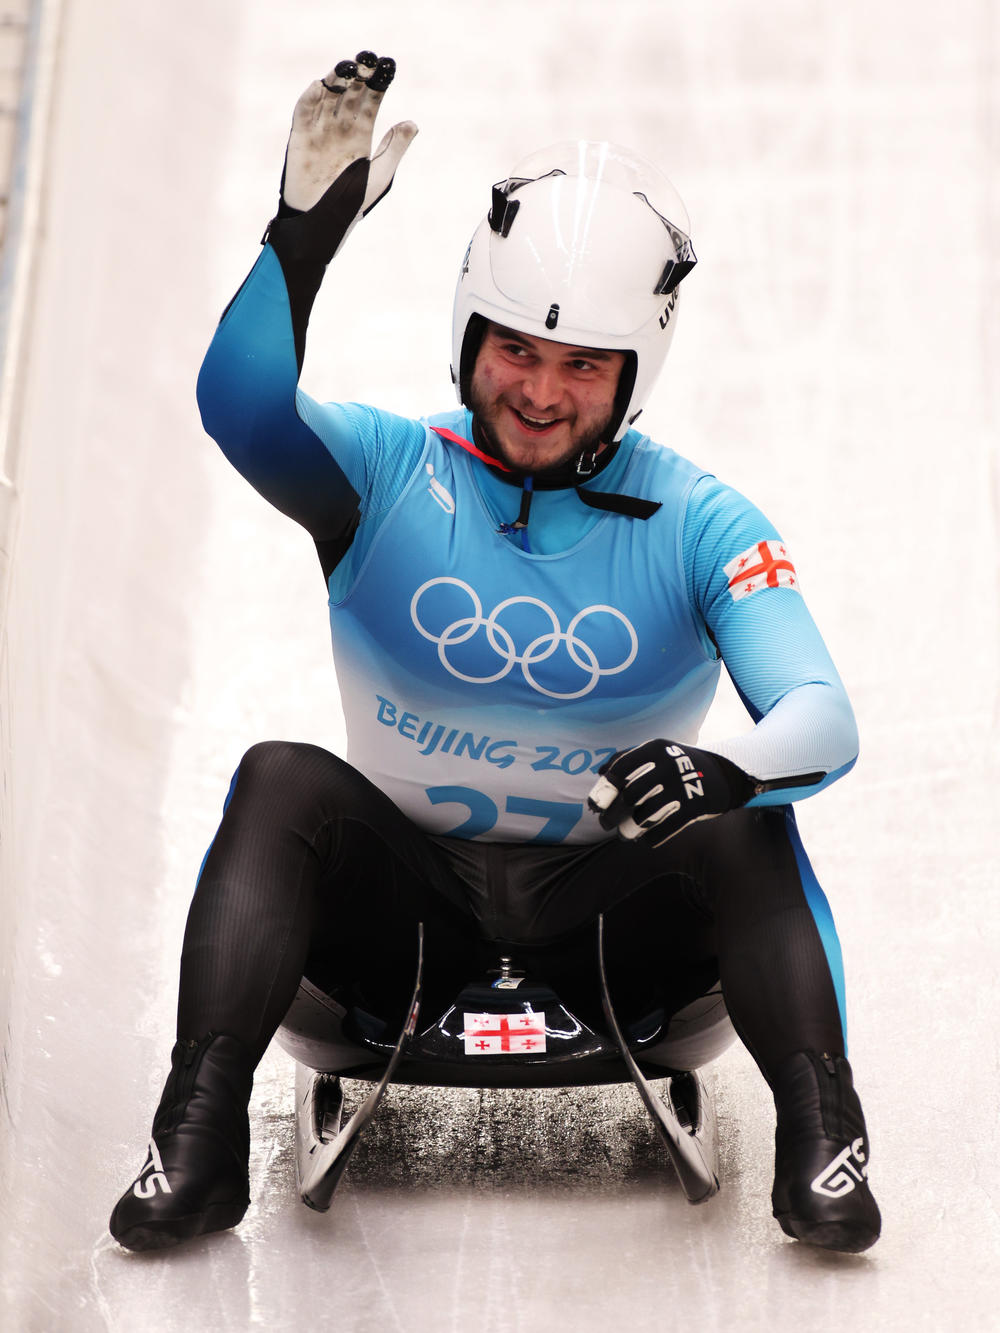 Saba Kumaritashvili of Team Georgia reacts after sliding during the Men's Singles Luge heats on day one of the Beijing 2022 Winter Olympic Games.